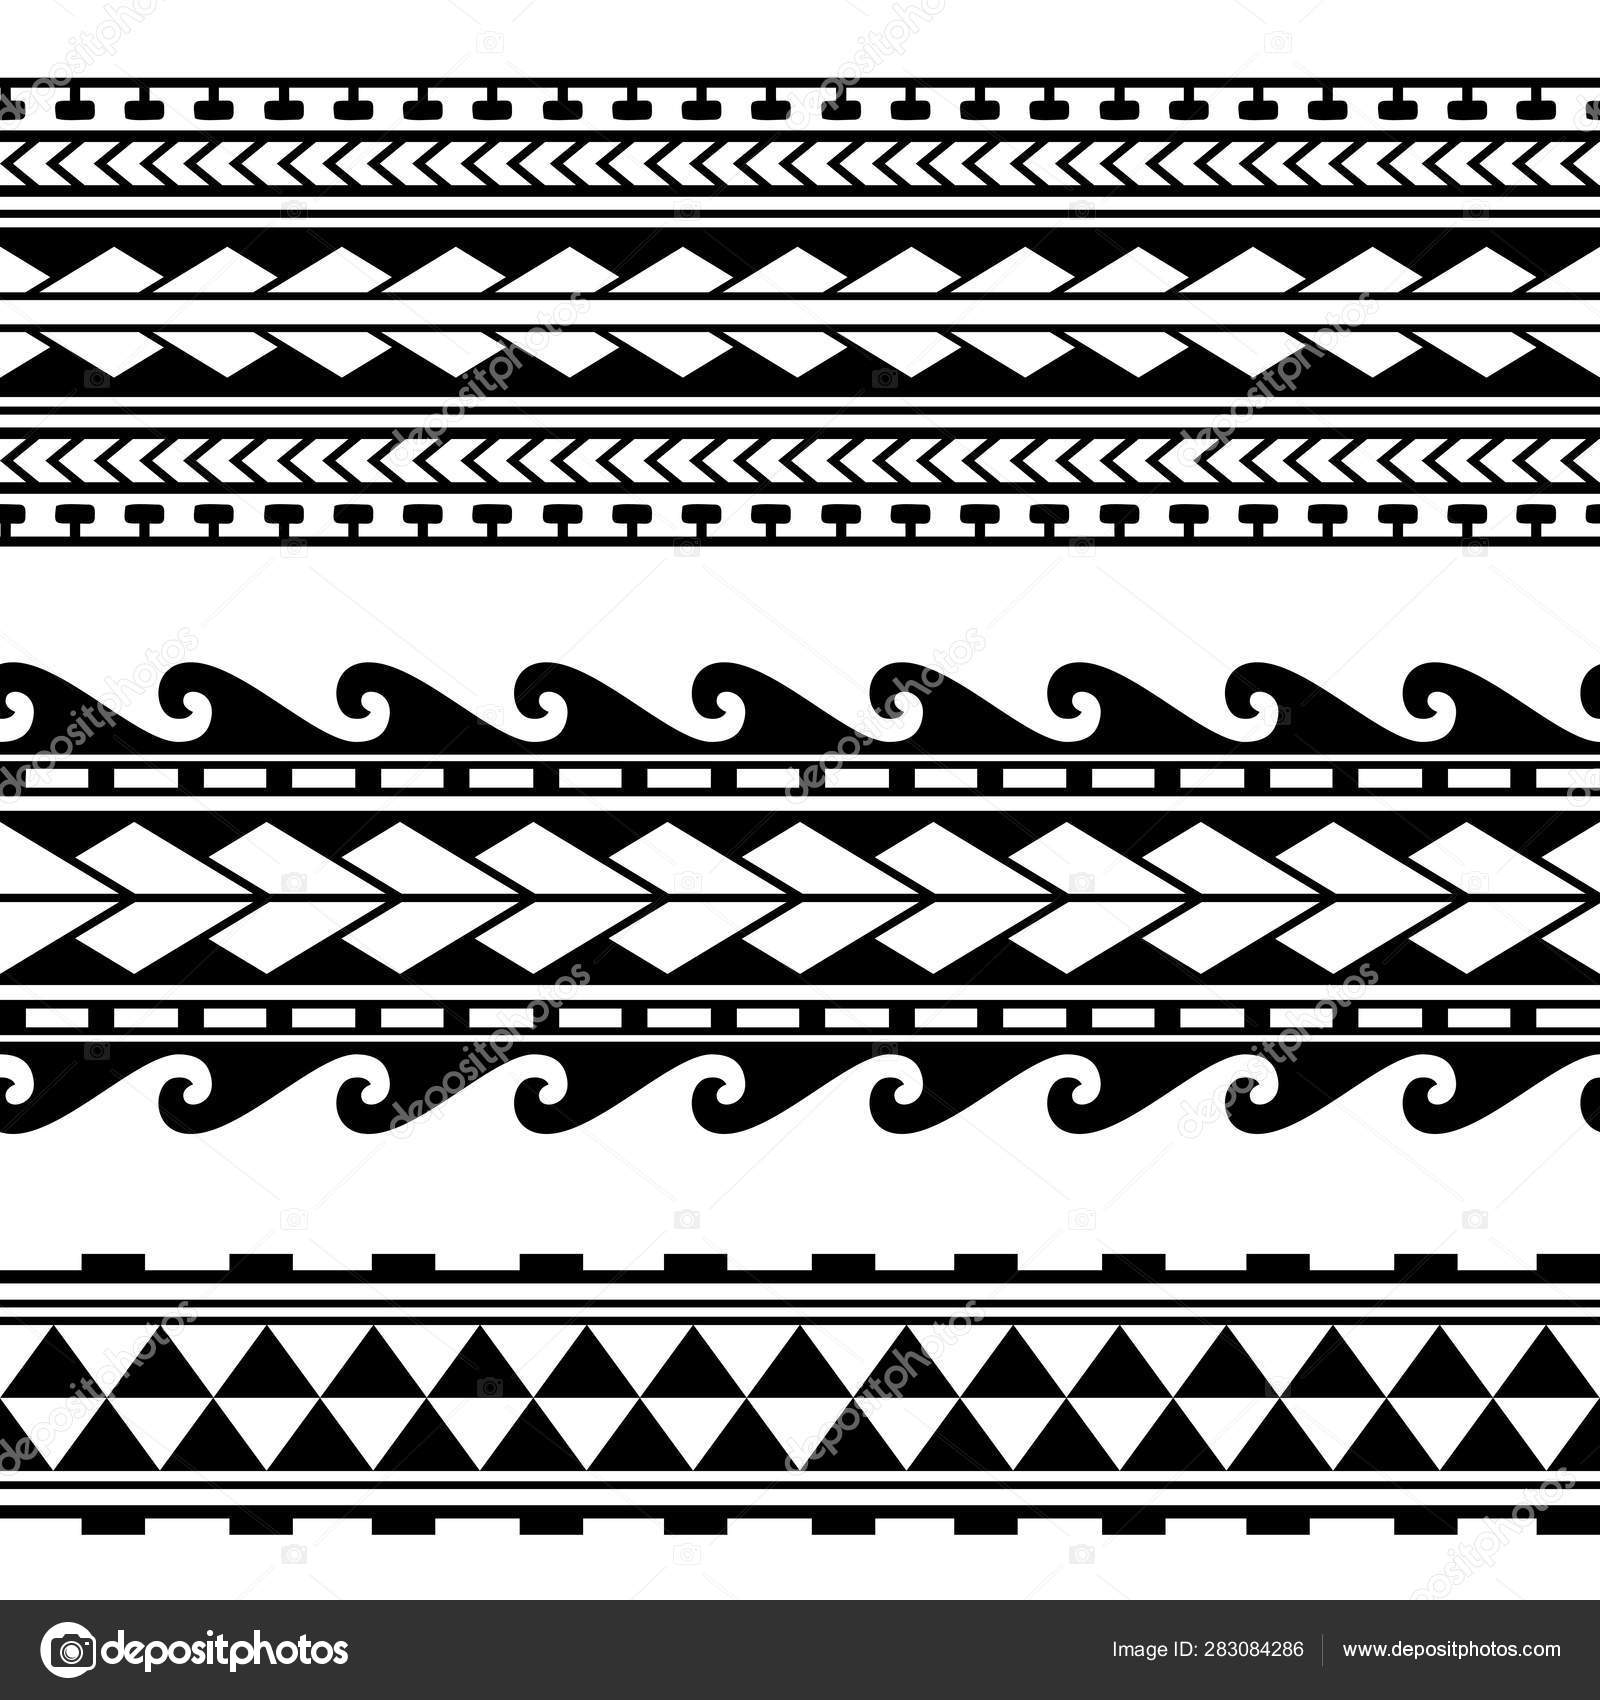 Maori Polynesian Tattoo Border Tribal Sleeve Seamless Pattern Vector Samoan Bracelet Tattoo Design Fore Arm Or Foot Armband Tattoo Tribal Band Fabric Seamless Ornament Isolated On White Background Stock Vector Image By C